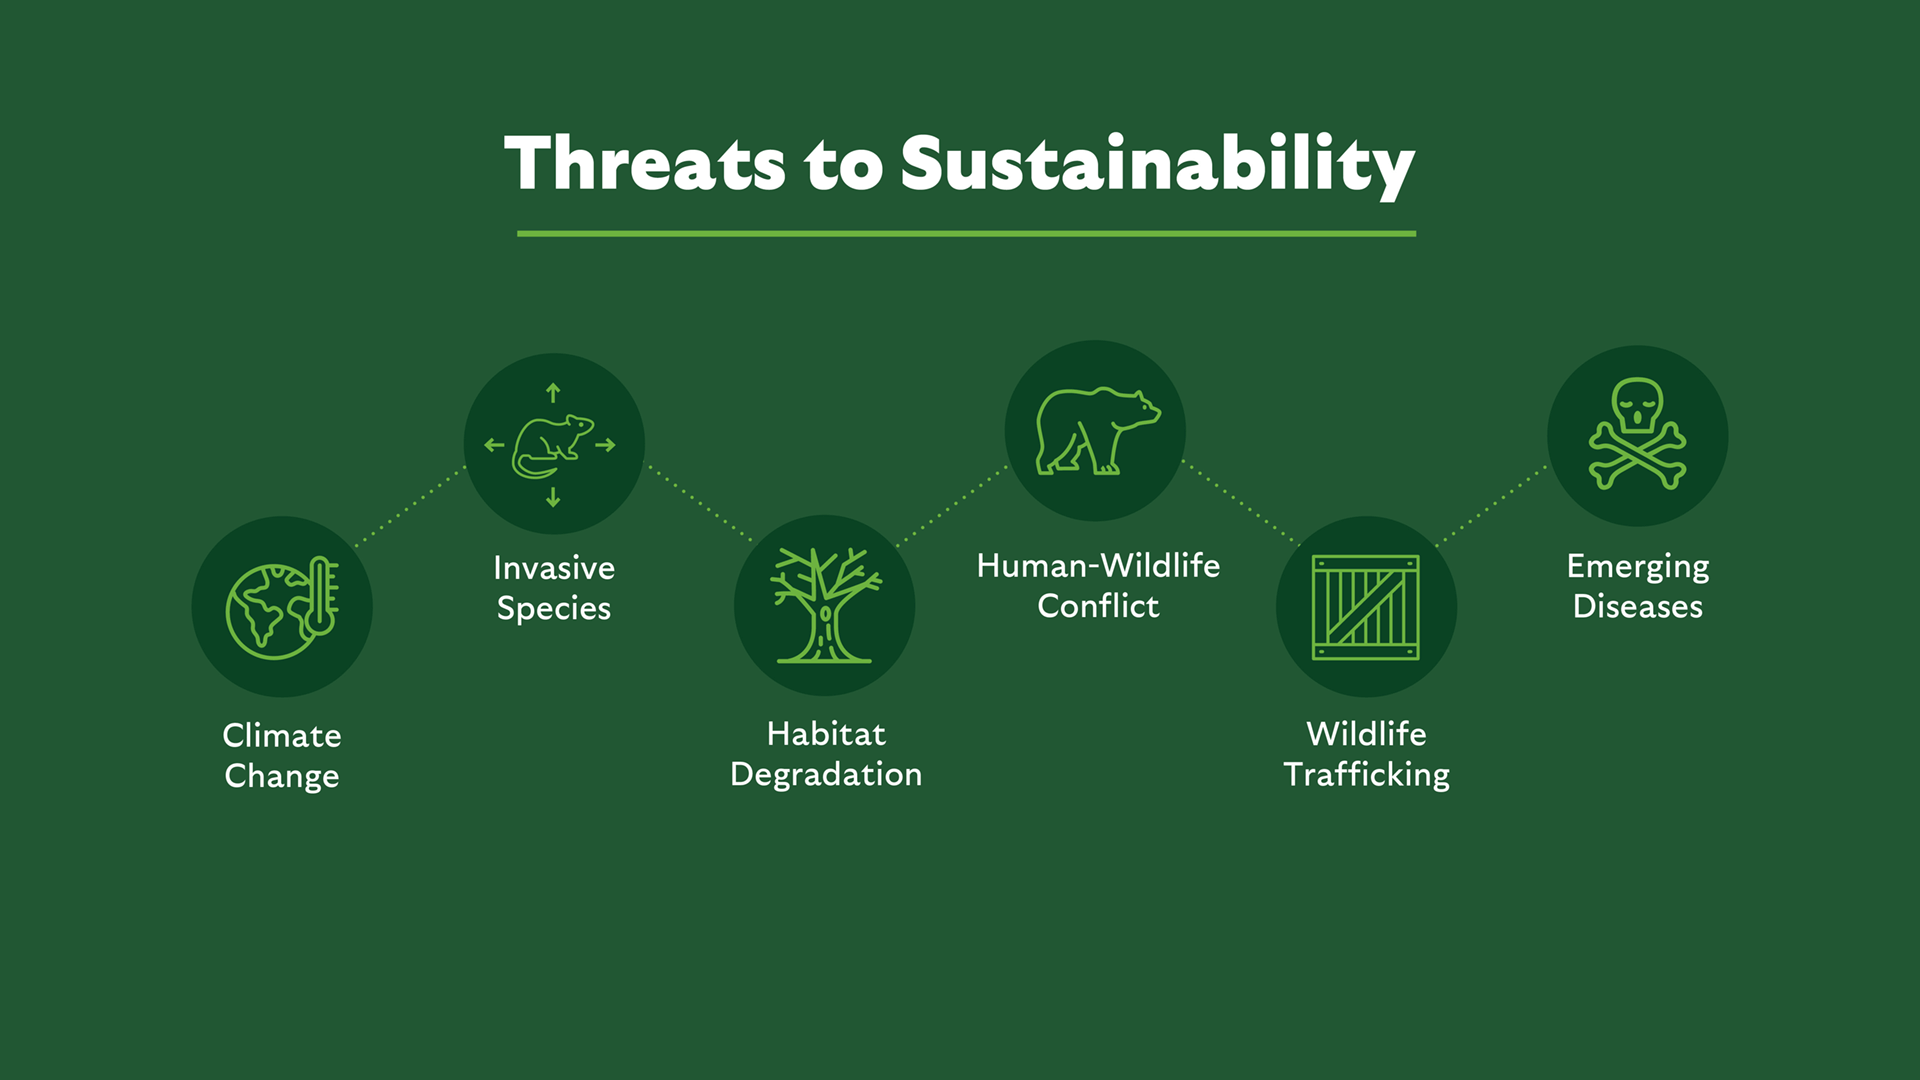  These include:  Climate change Invasive species Habitat degradation Human-Wildlife Conflict Wildlife Trafficking Emerging Diseases